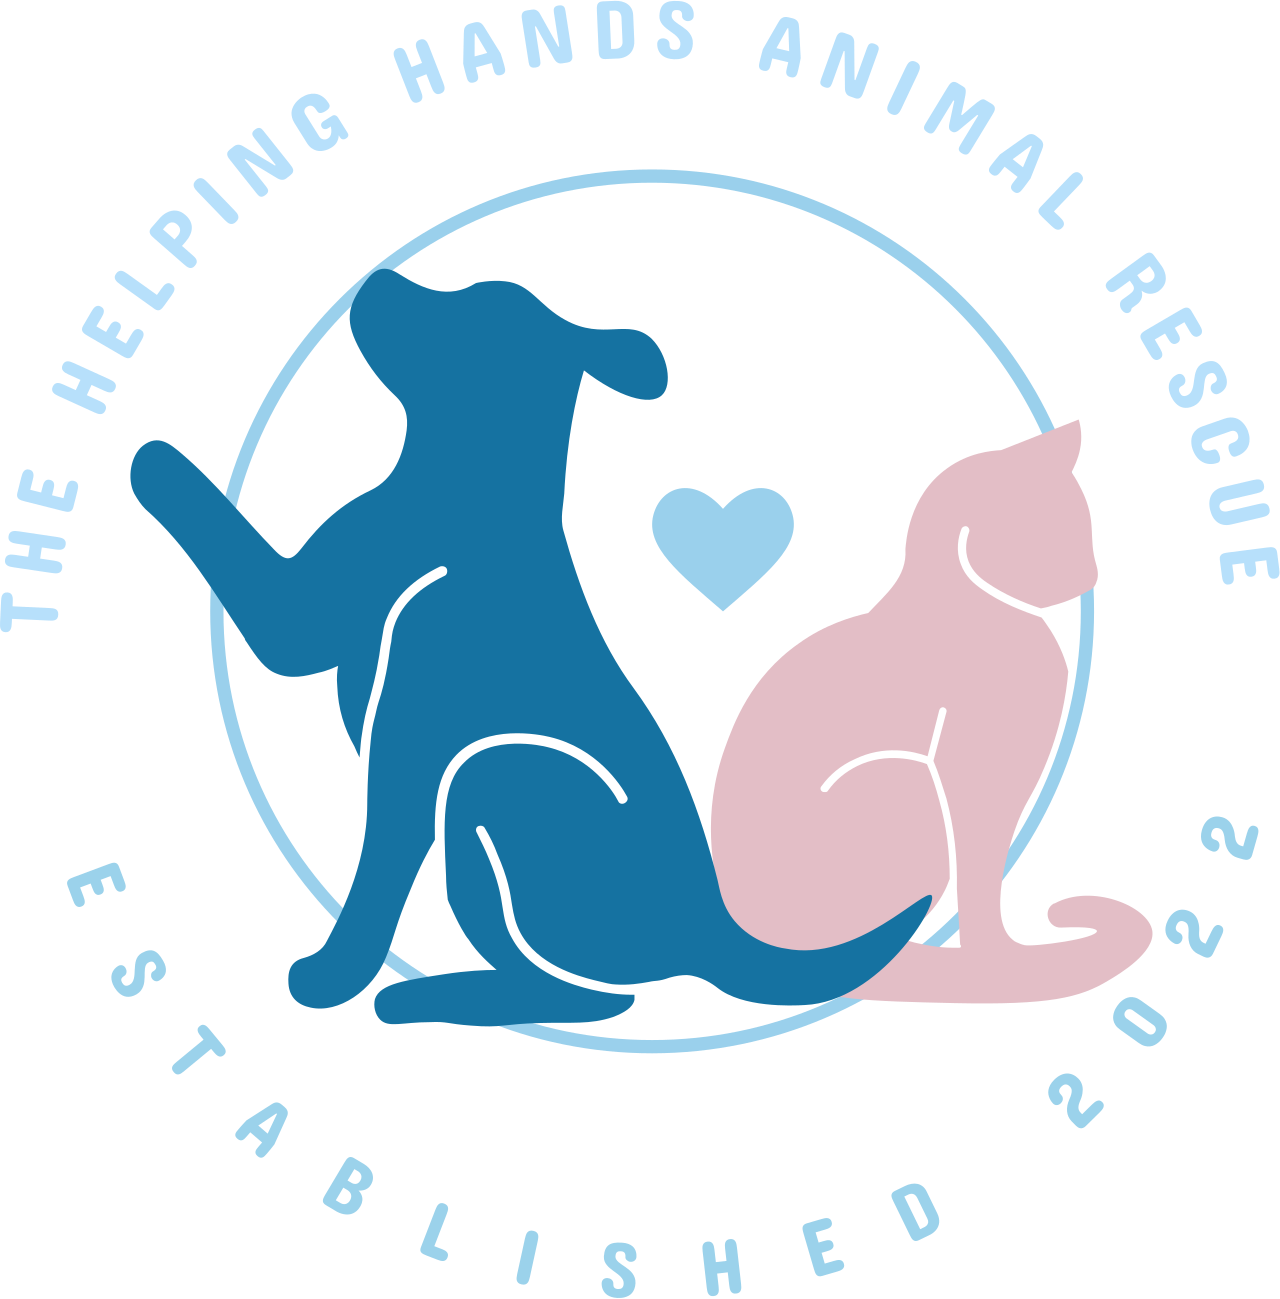 THE HELPING HANDS ANIMAL RESCUE 's web page